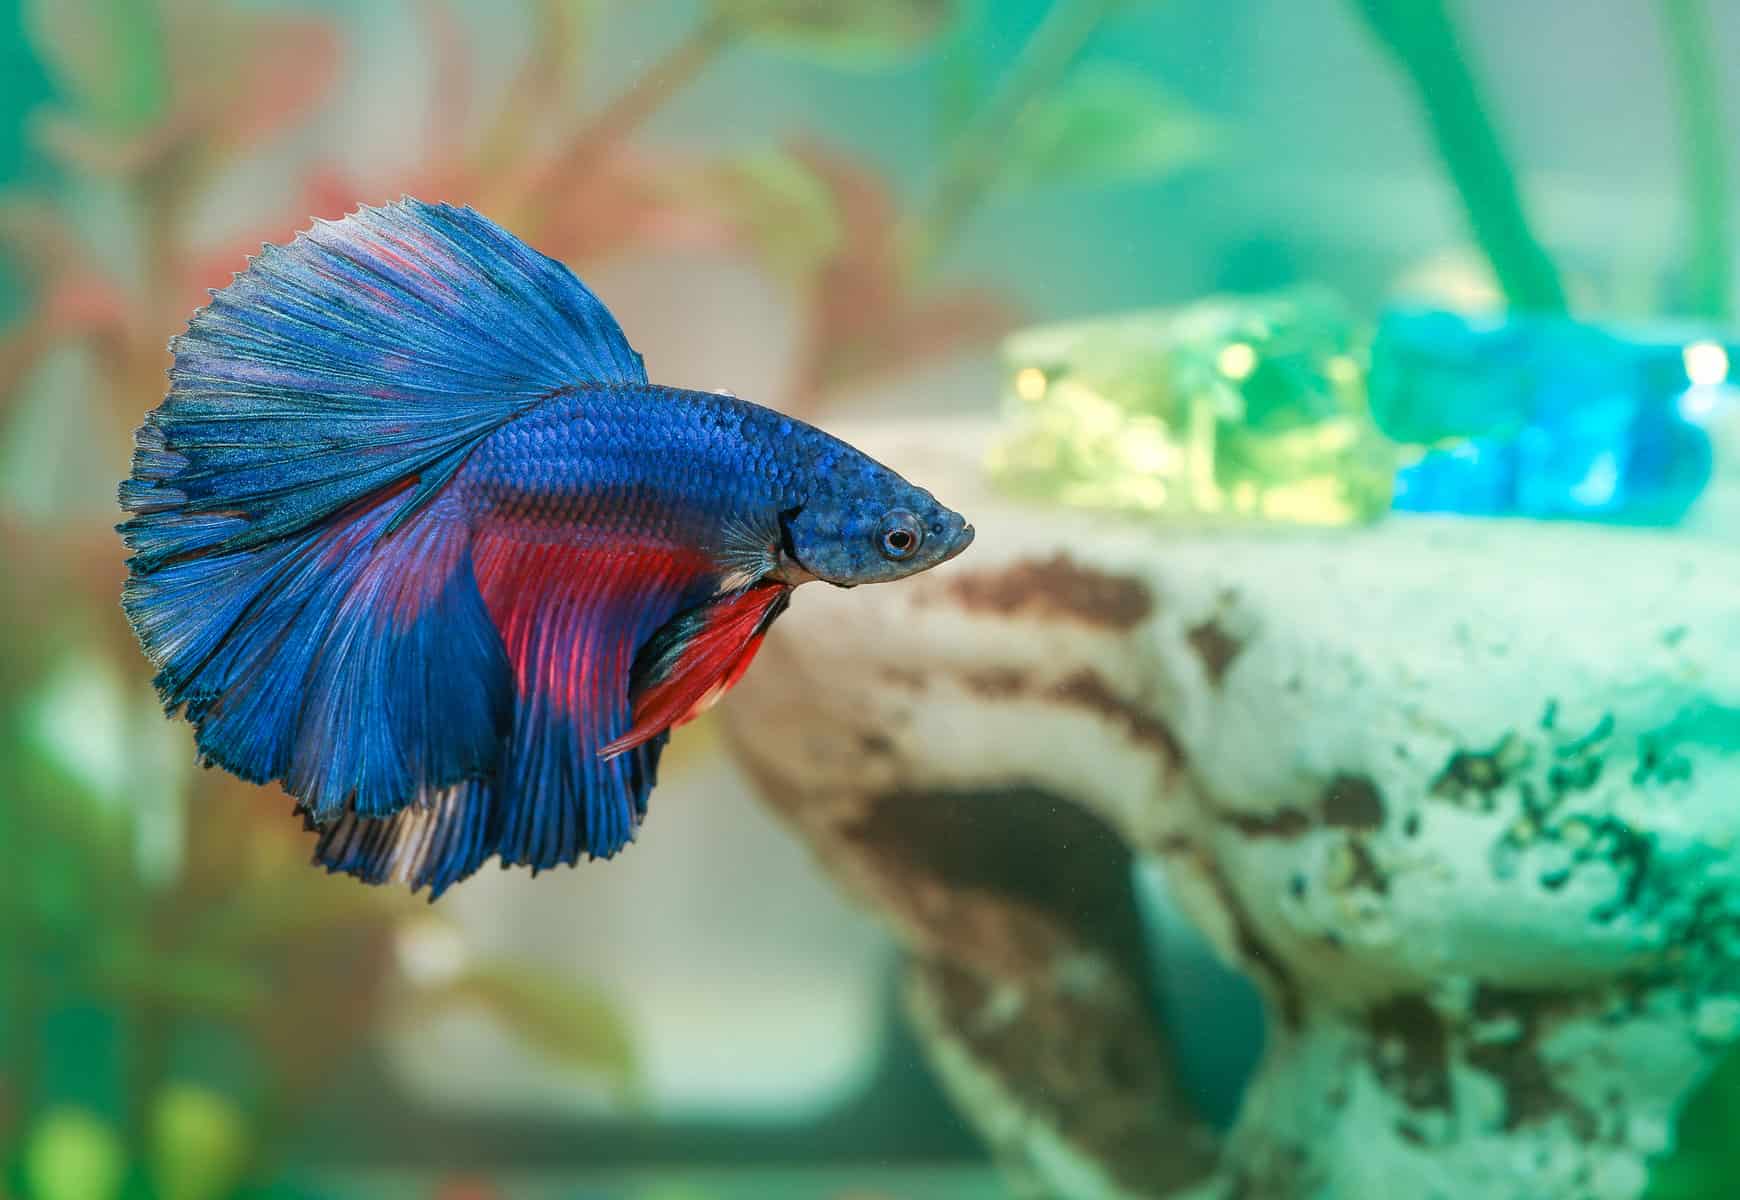 Vibrant and colorful betta fish swimming in a well-maintained aquarium